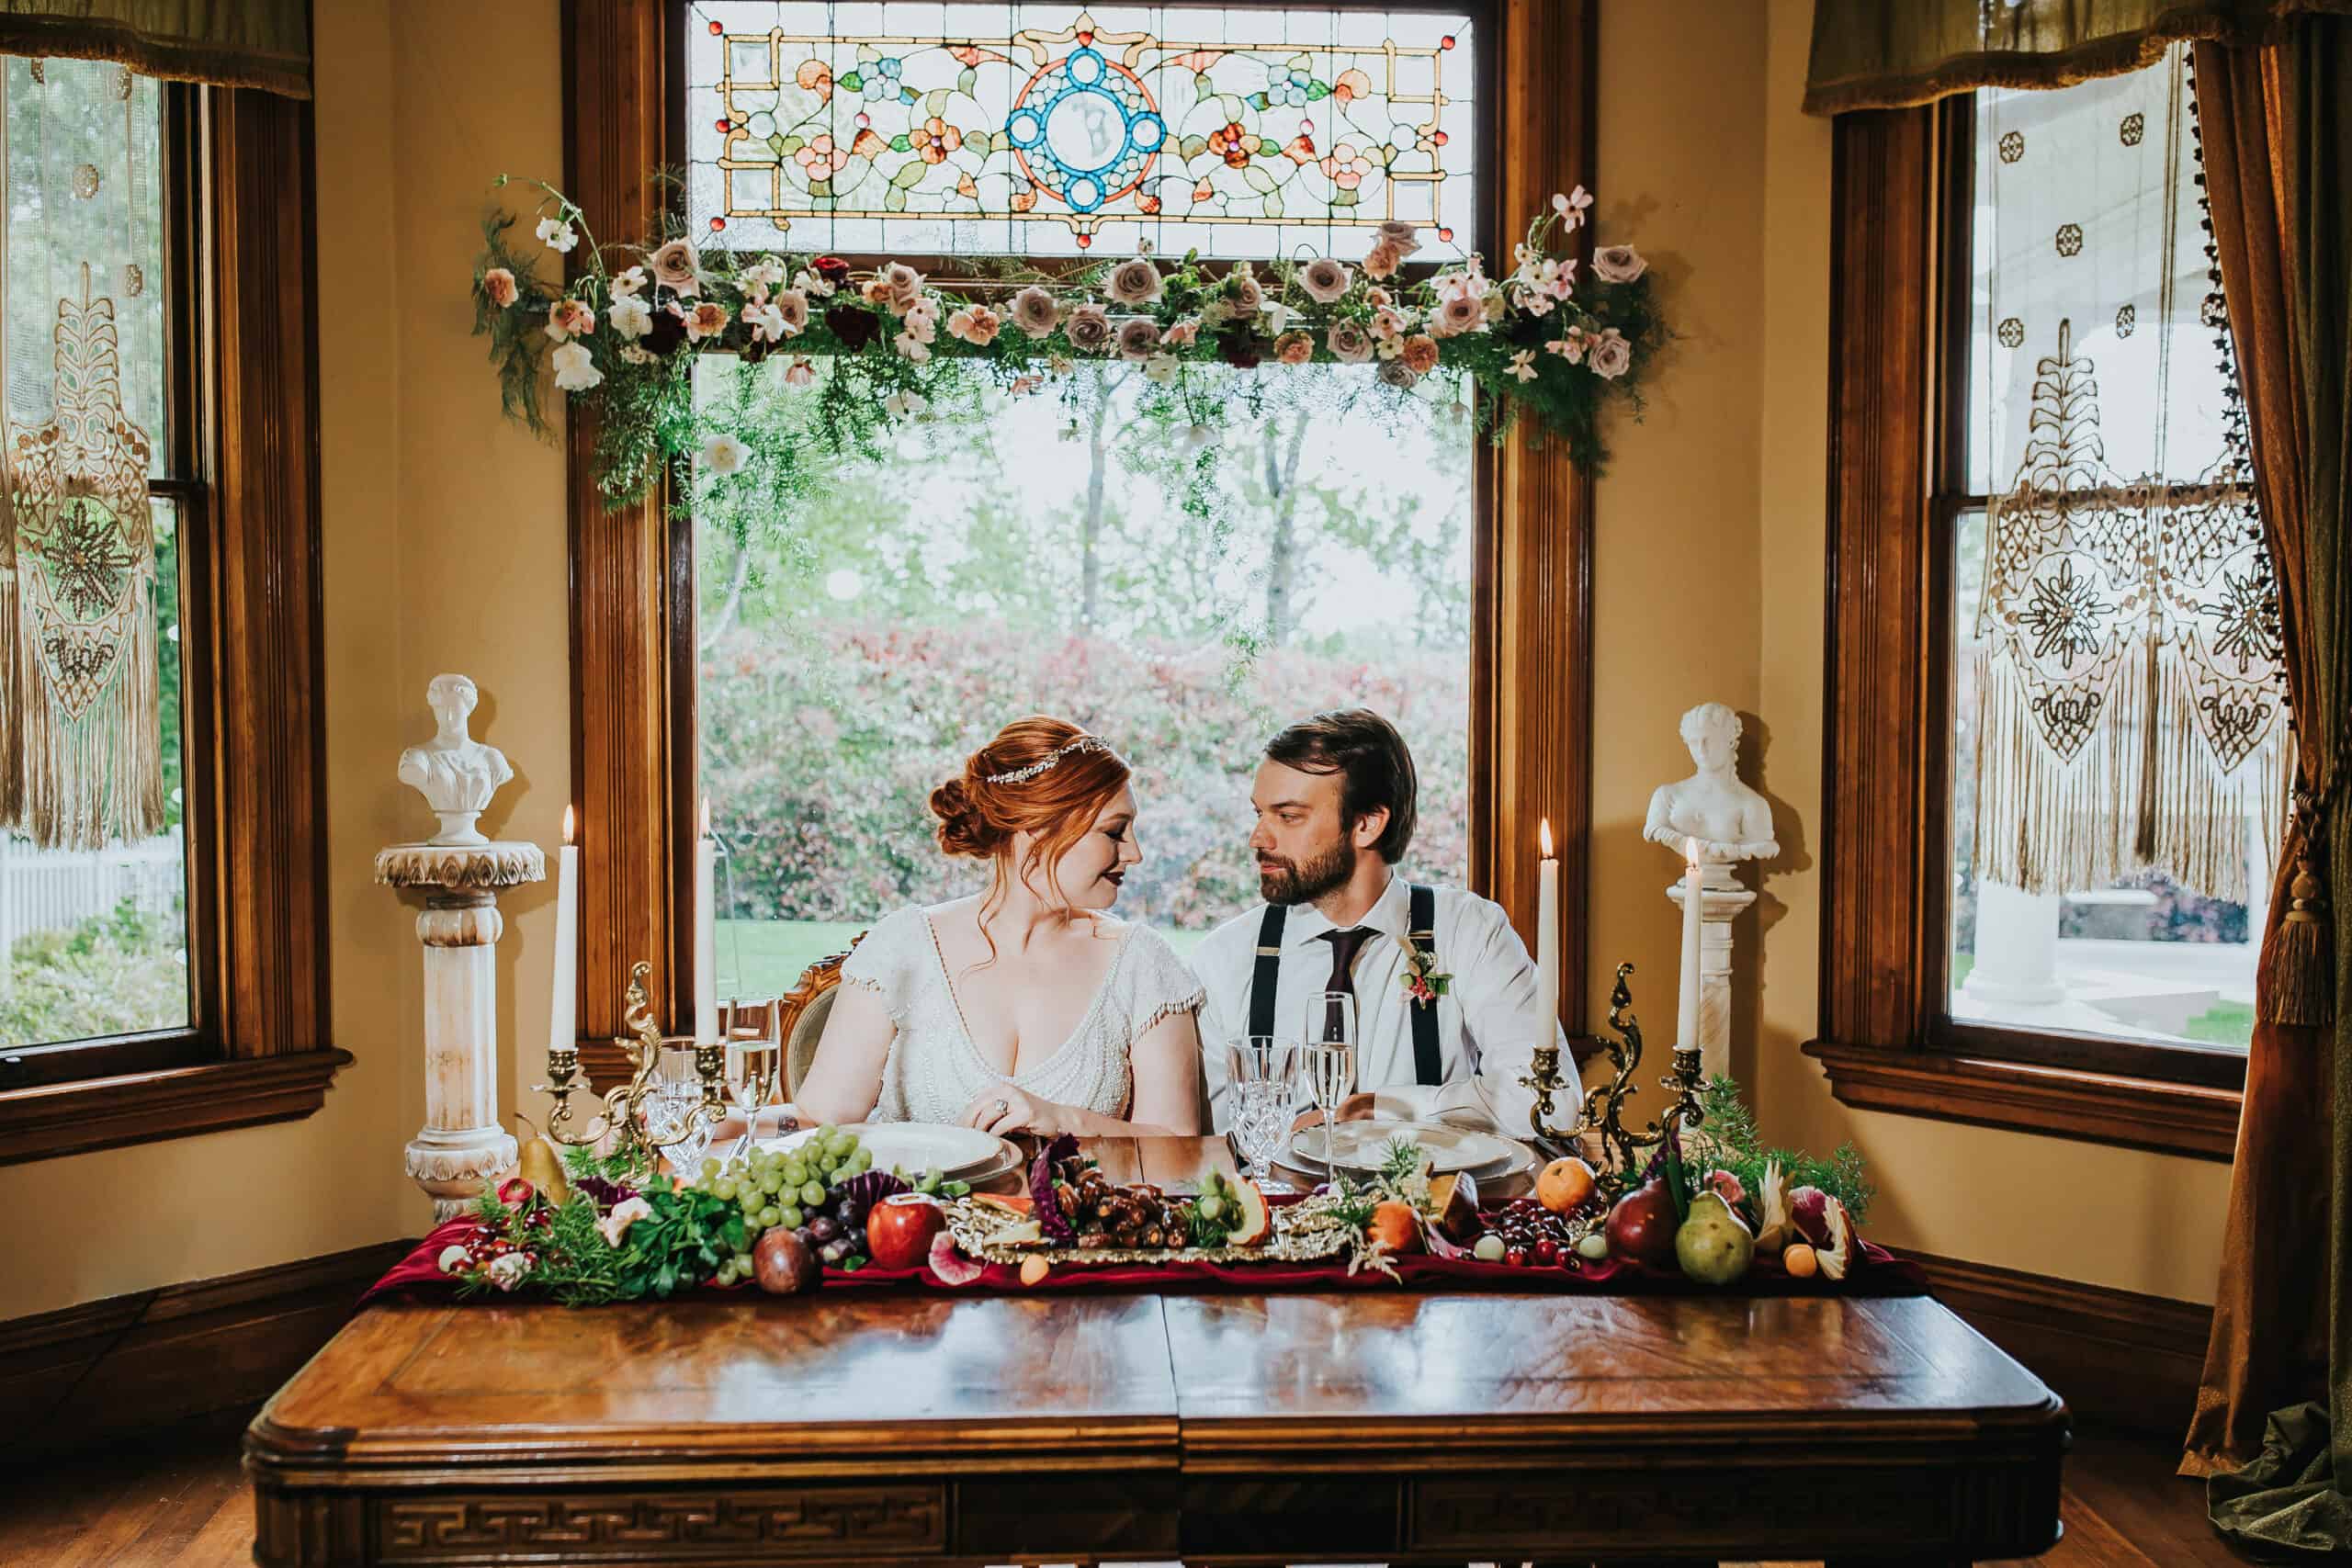 A couple smiles at each other while seated at a table decorated with fruit and flowers. They are seated under stained glass windows with floral accents.